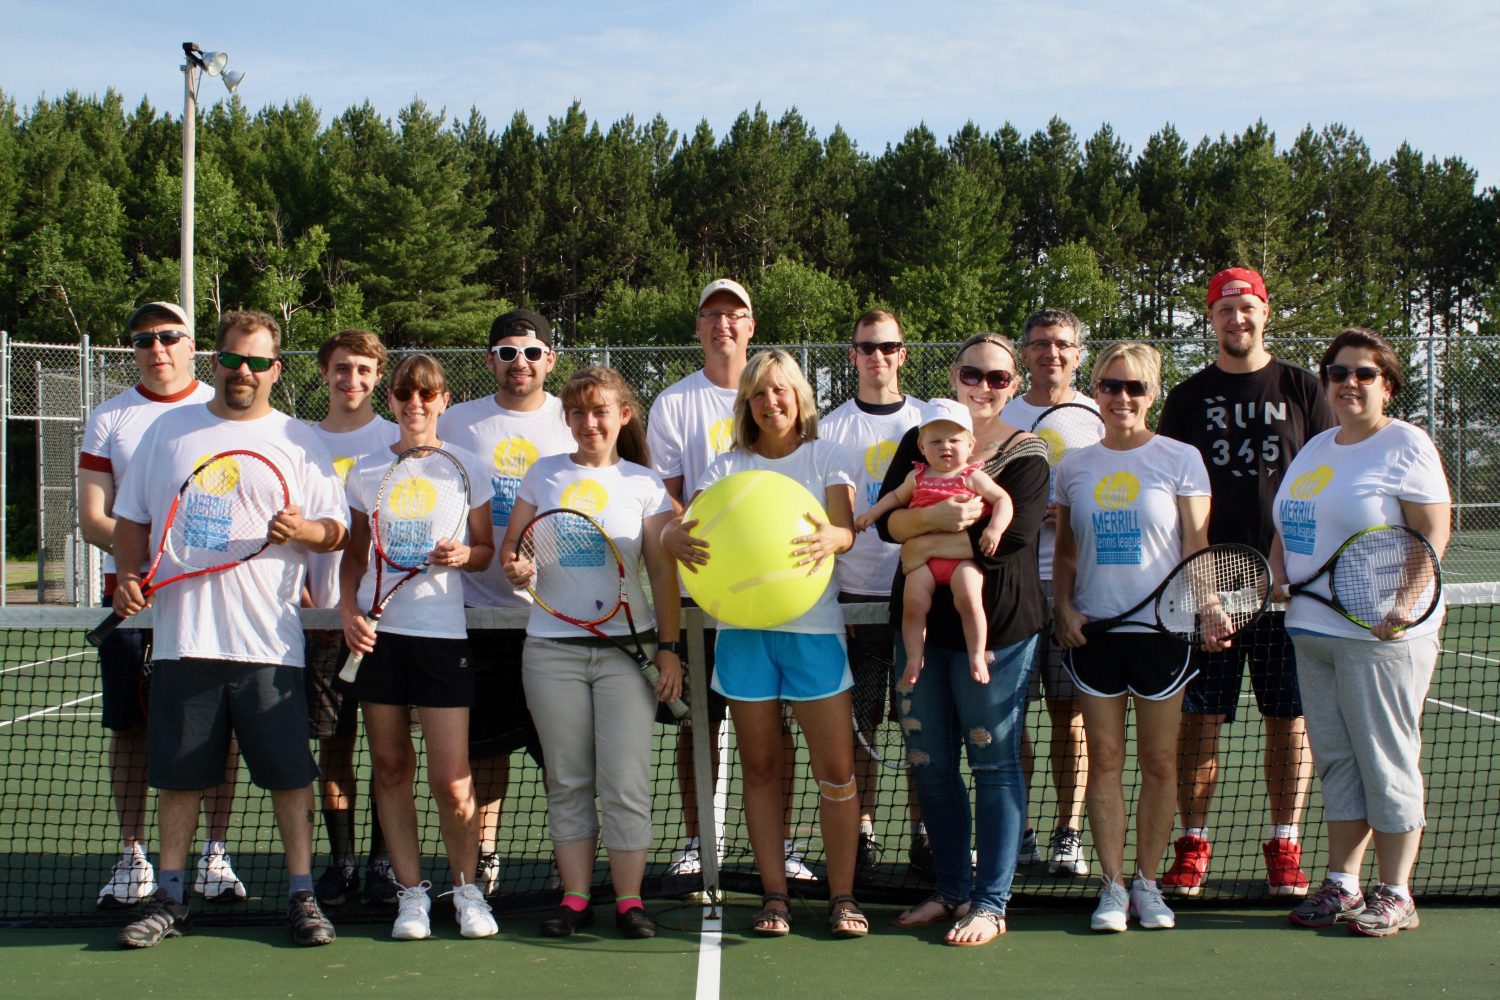 Merrill Parks and Recreation holds summer tennis league